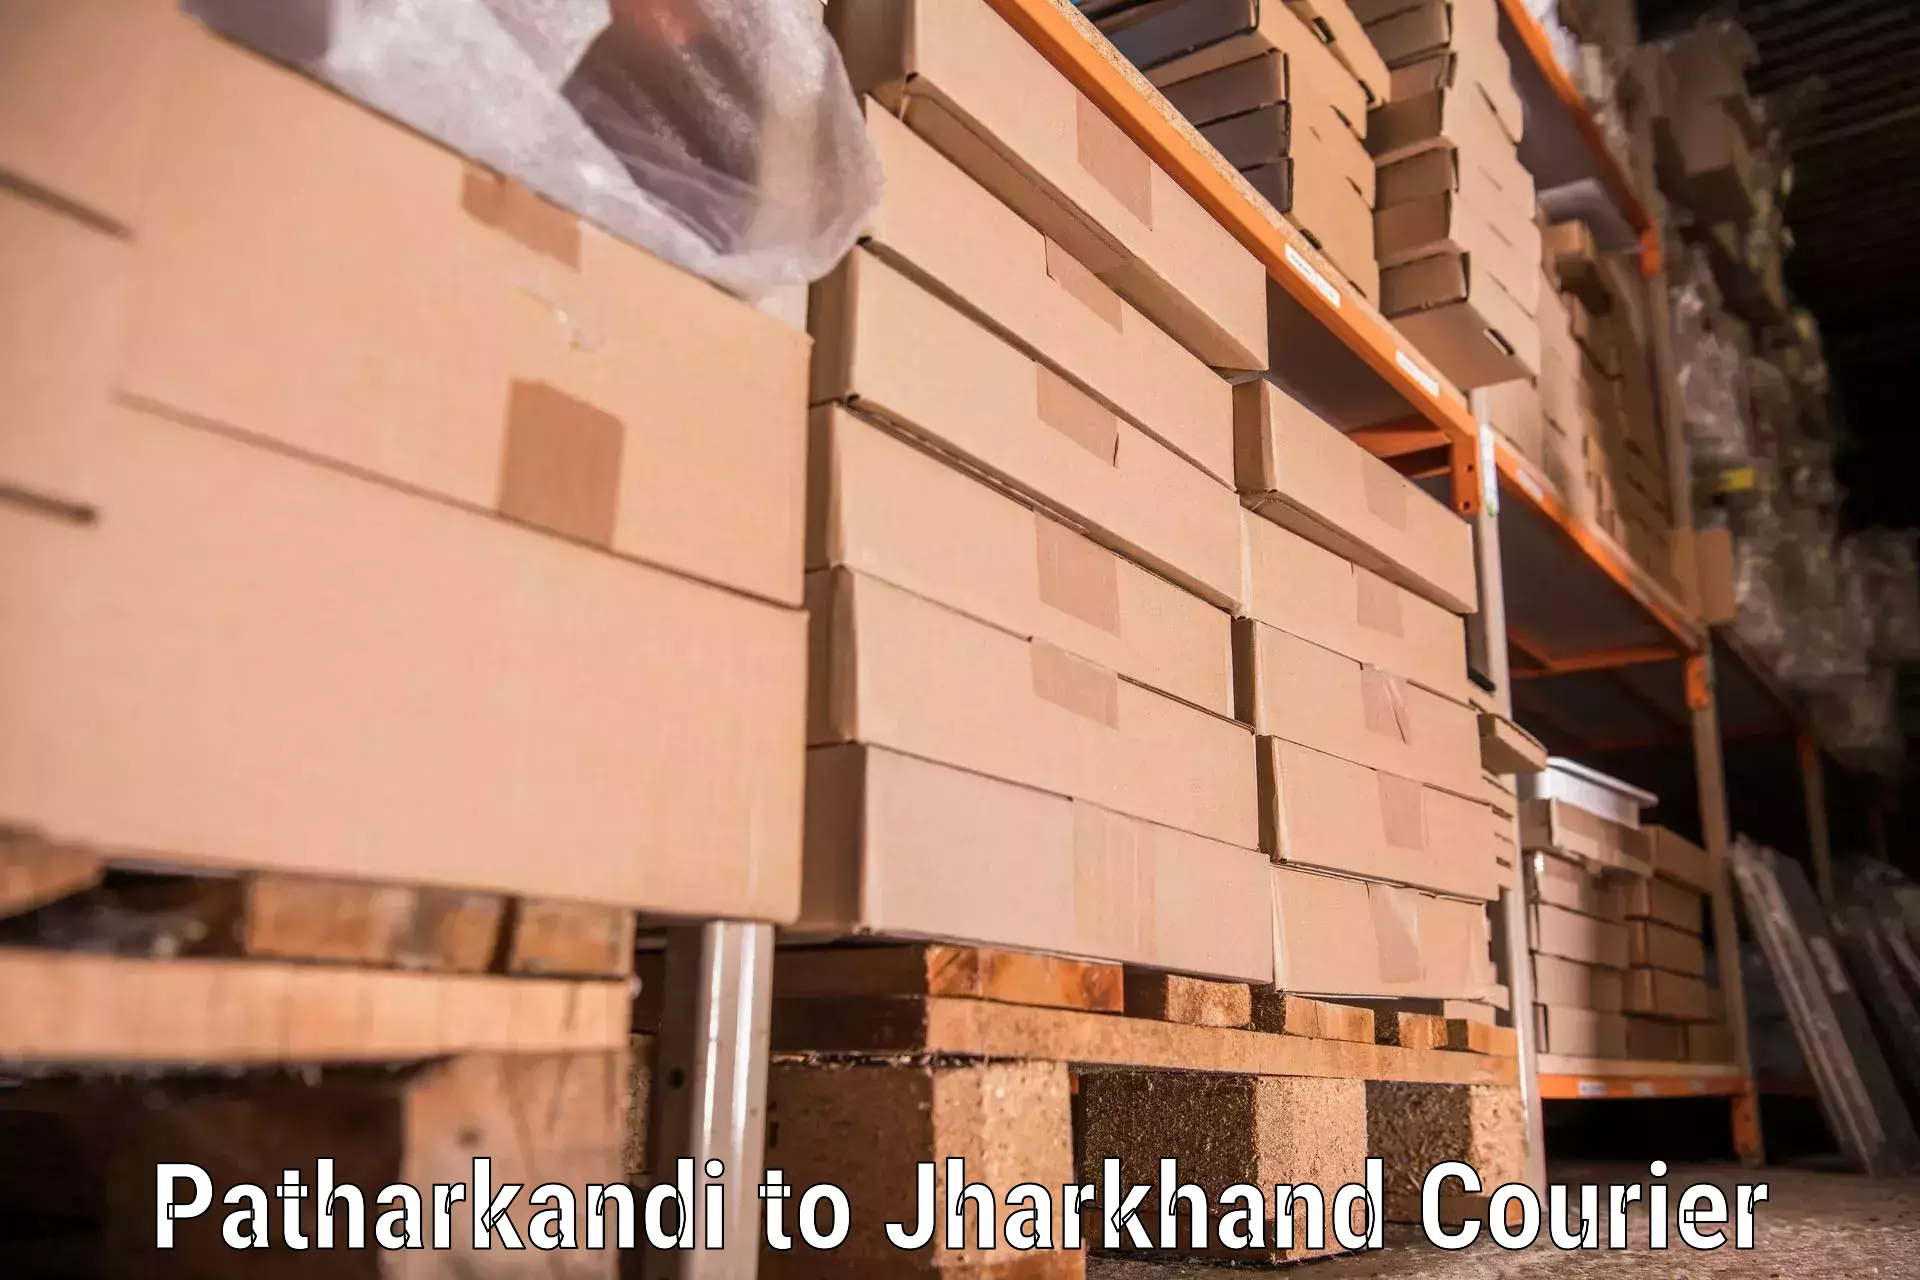 Moving and storage services Patharkandi to Dhanbad